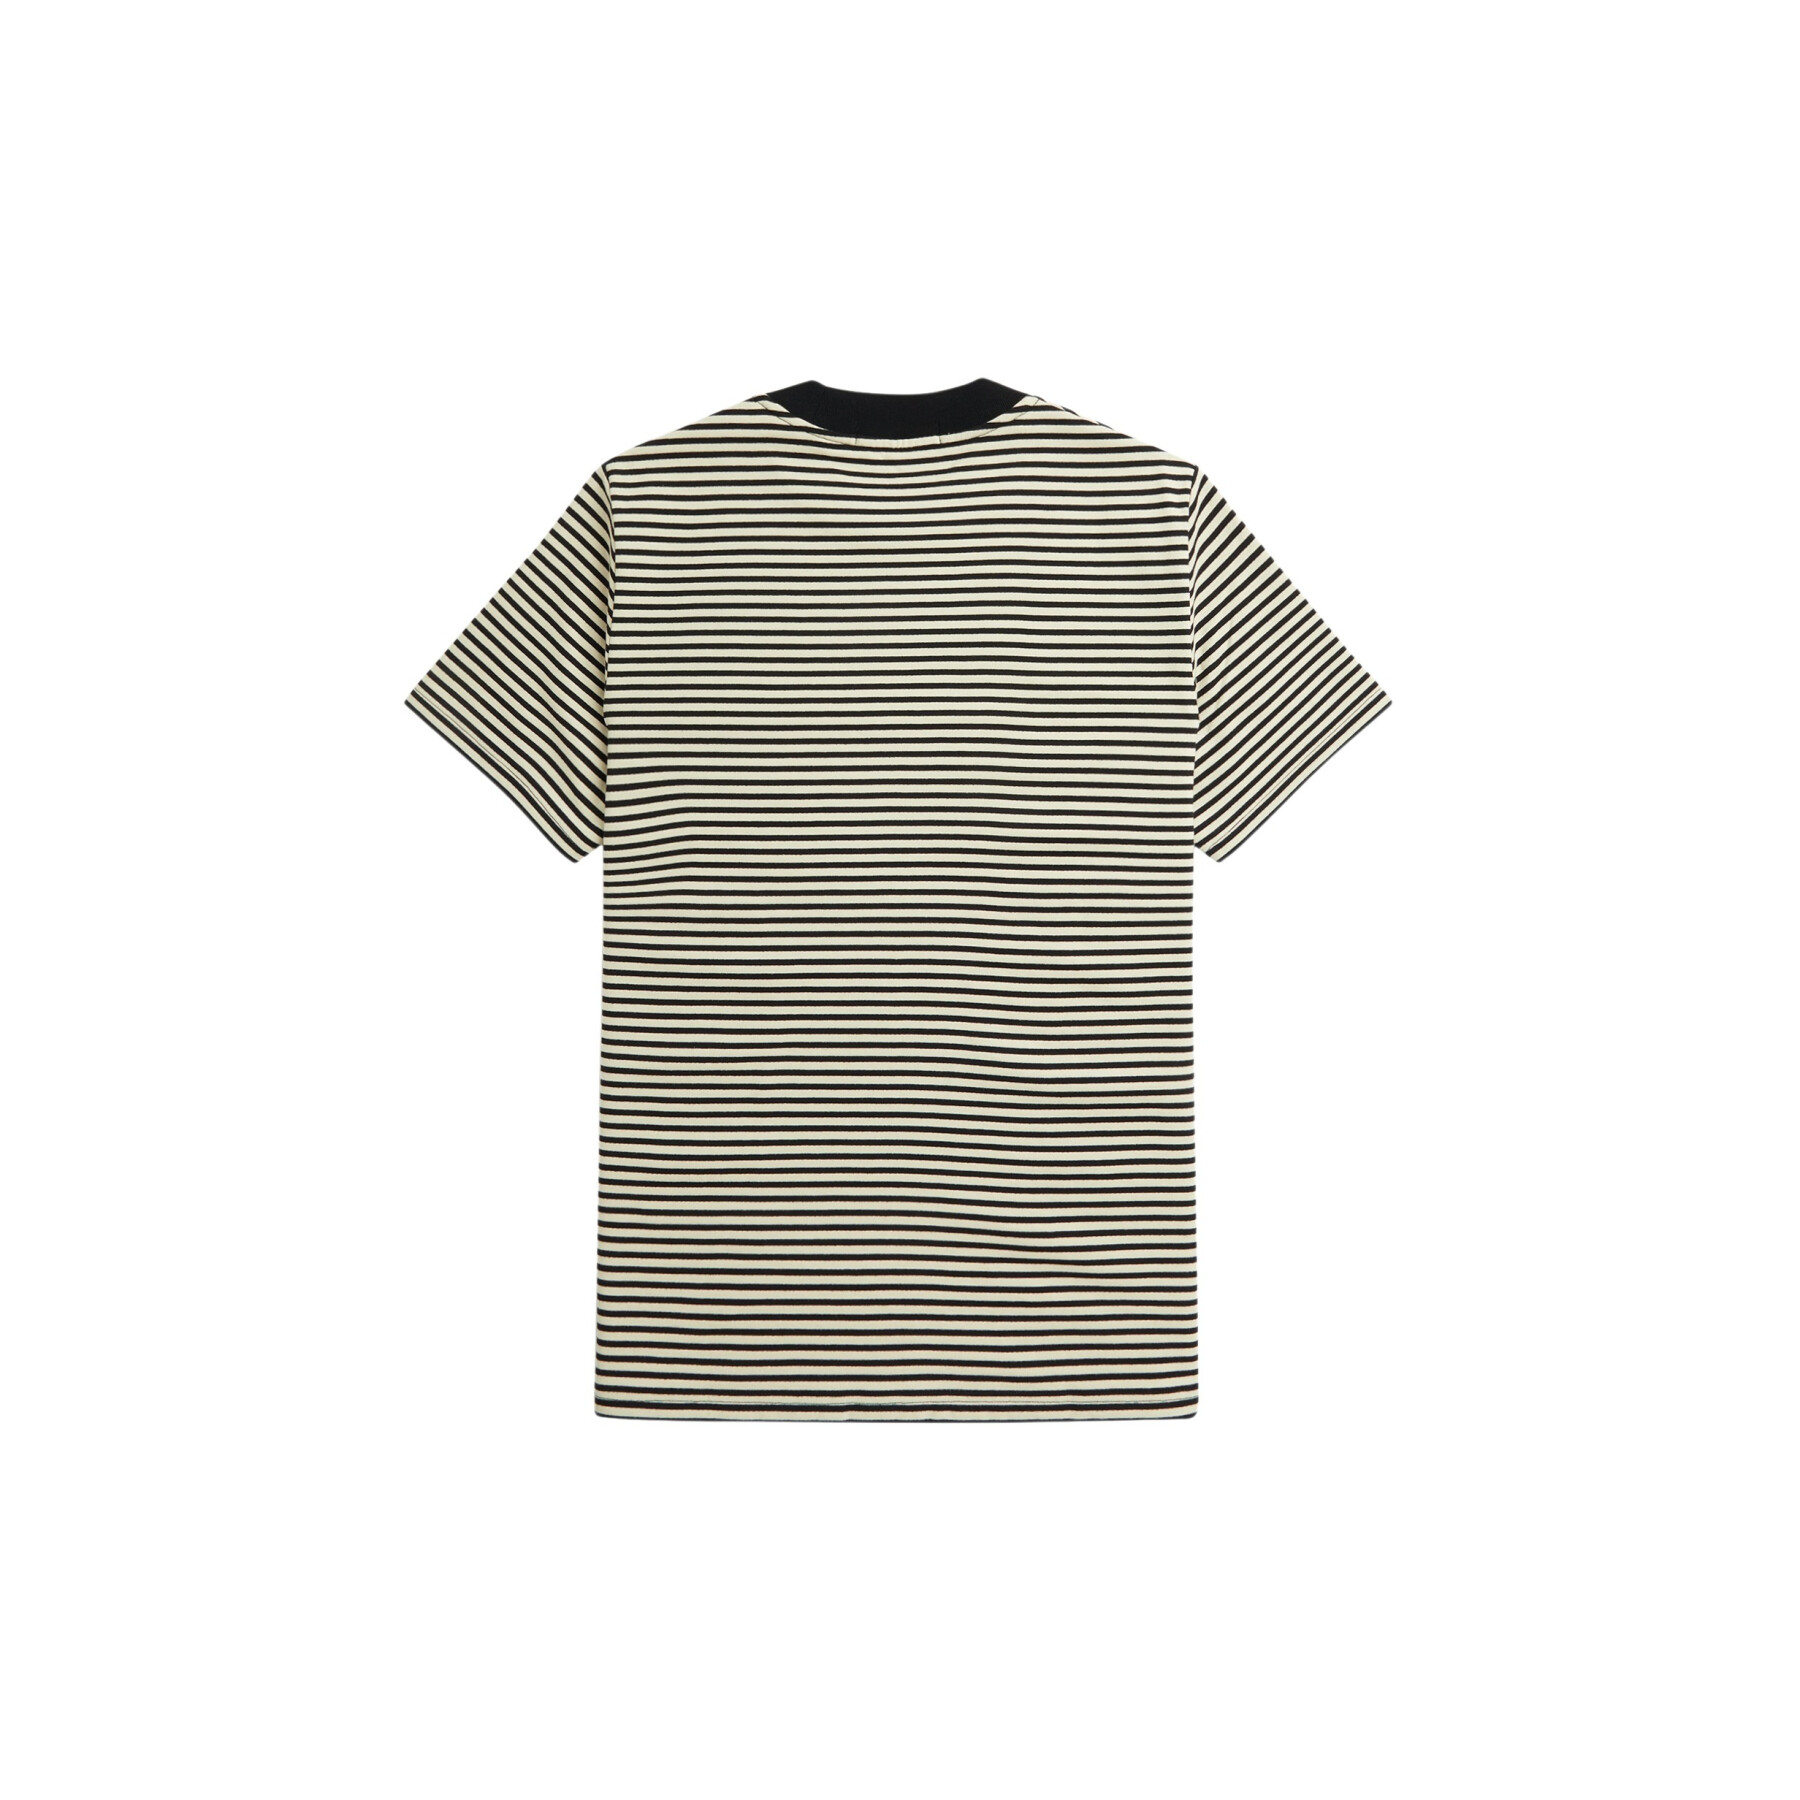 T-shirt Fred Perry Fine Stripe Heavy Weight